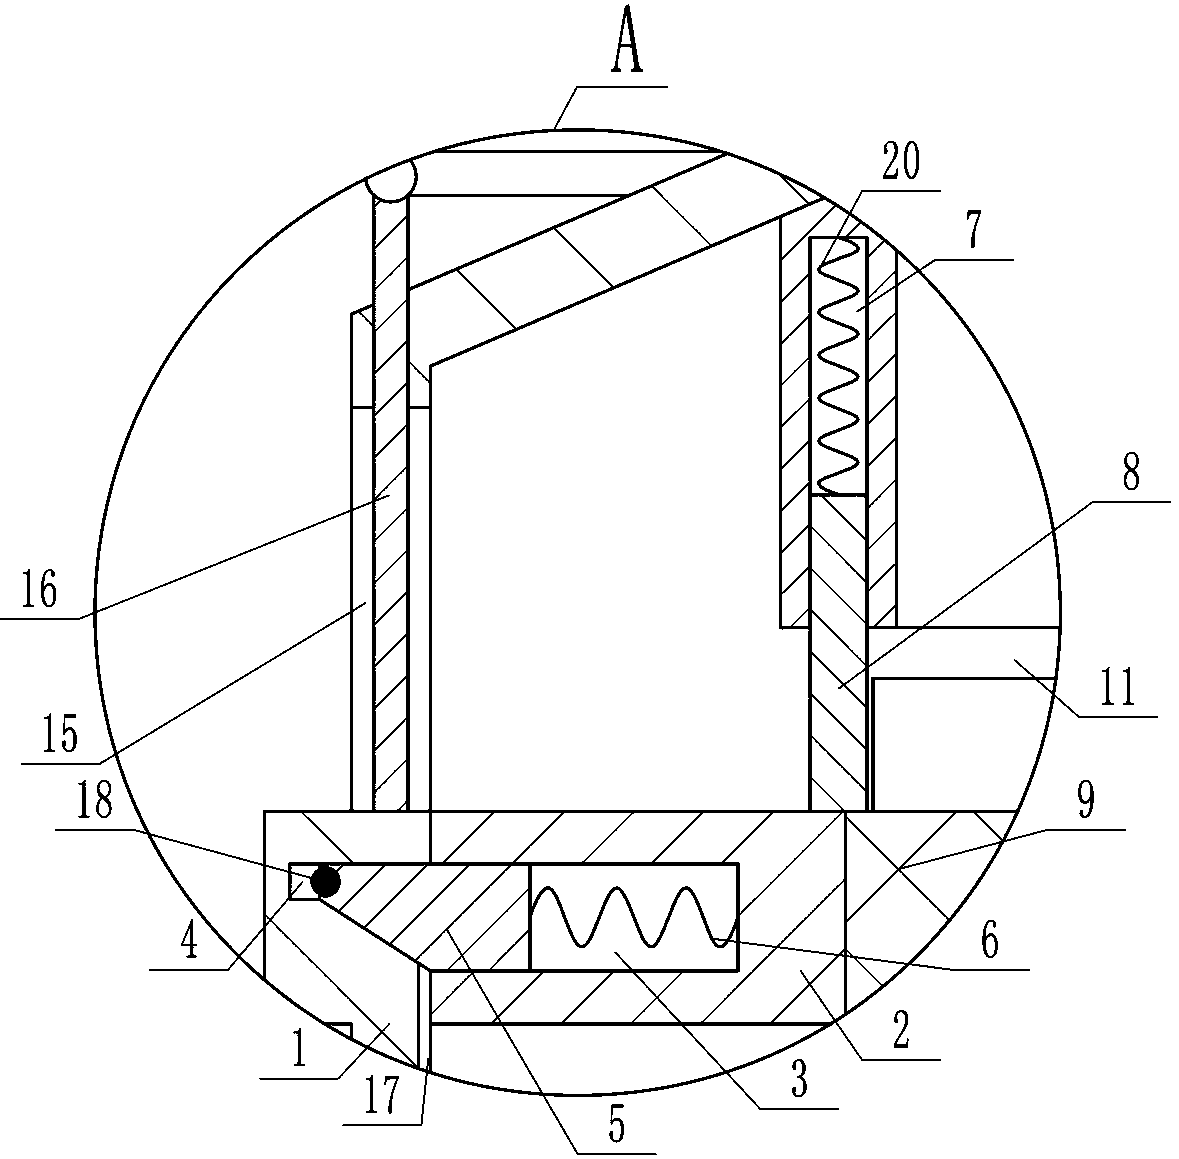 Primary filtering device for sewage treatment